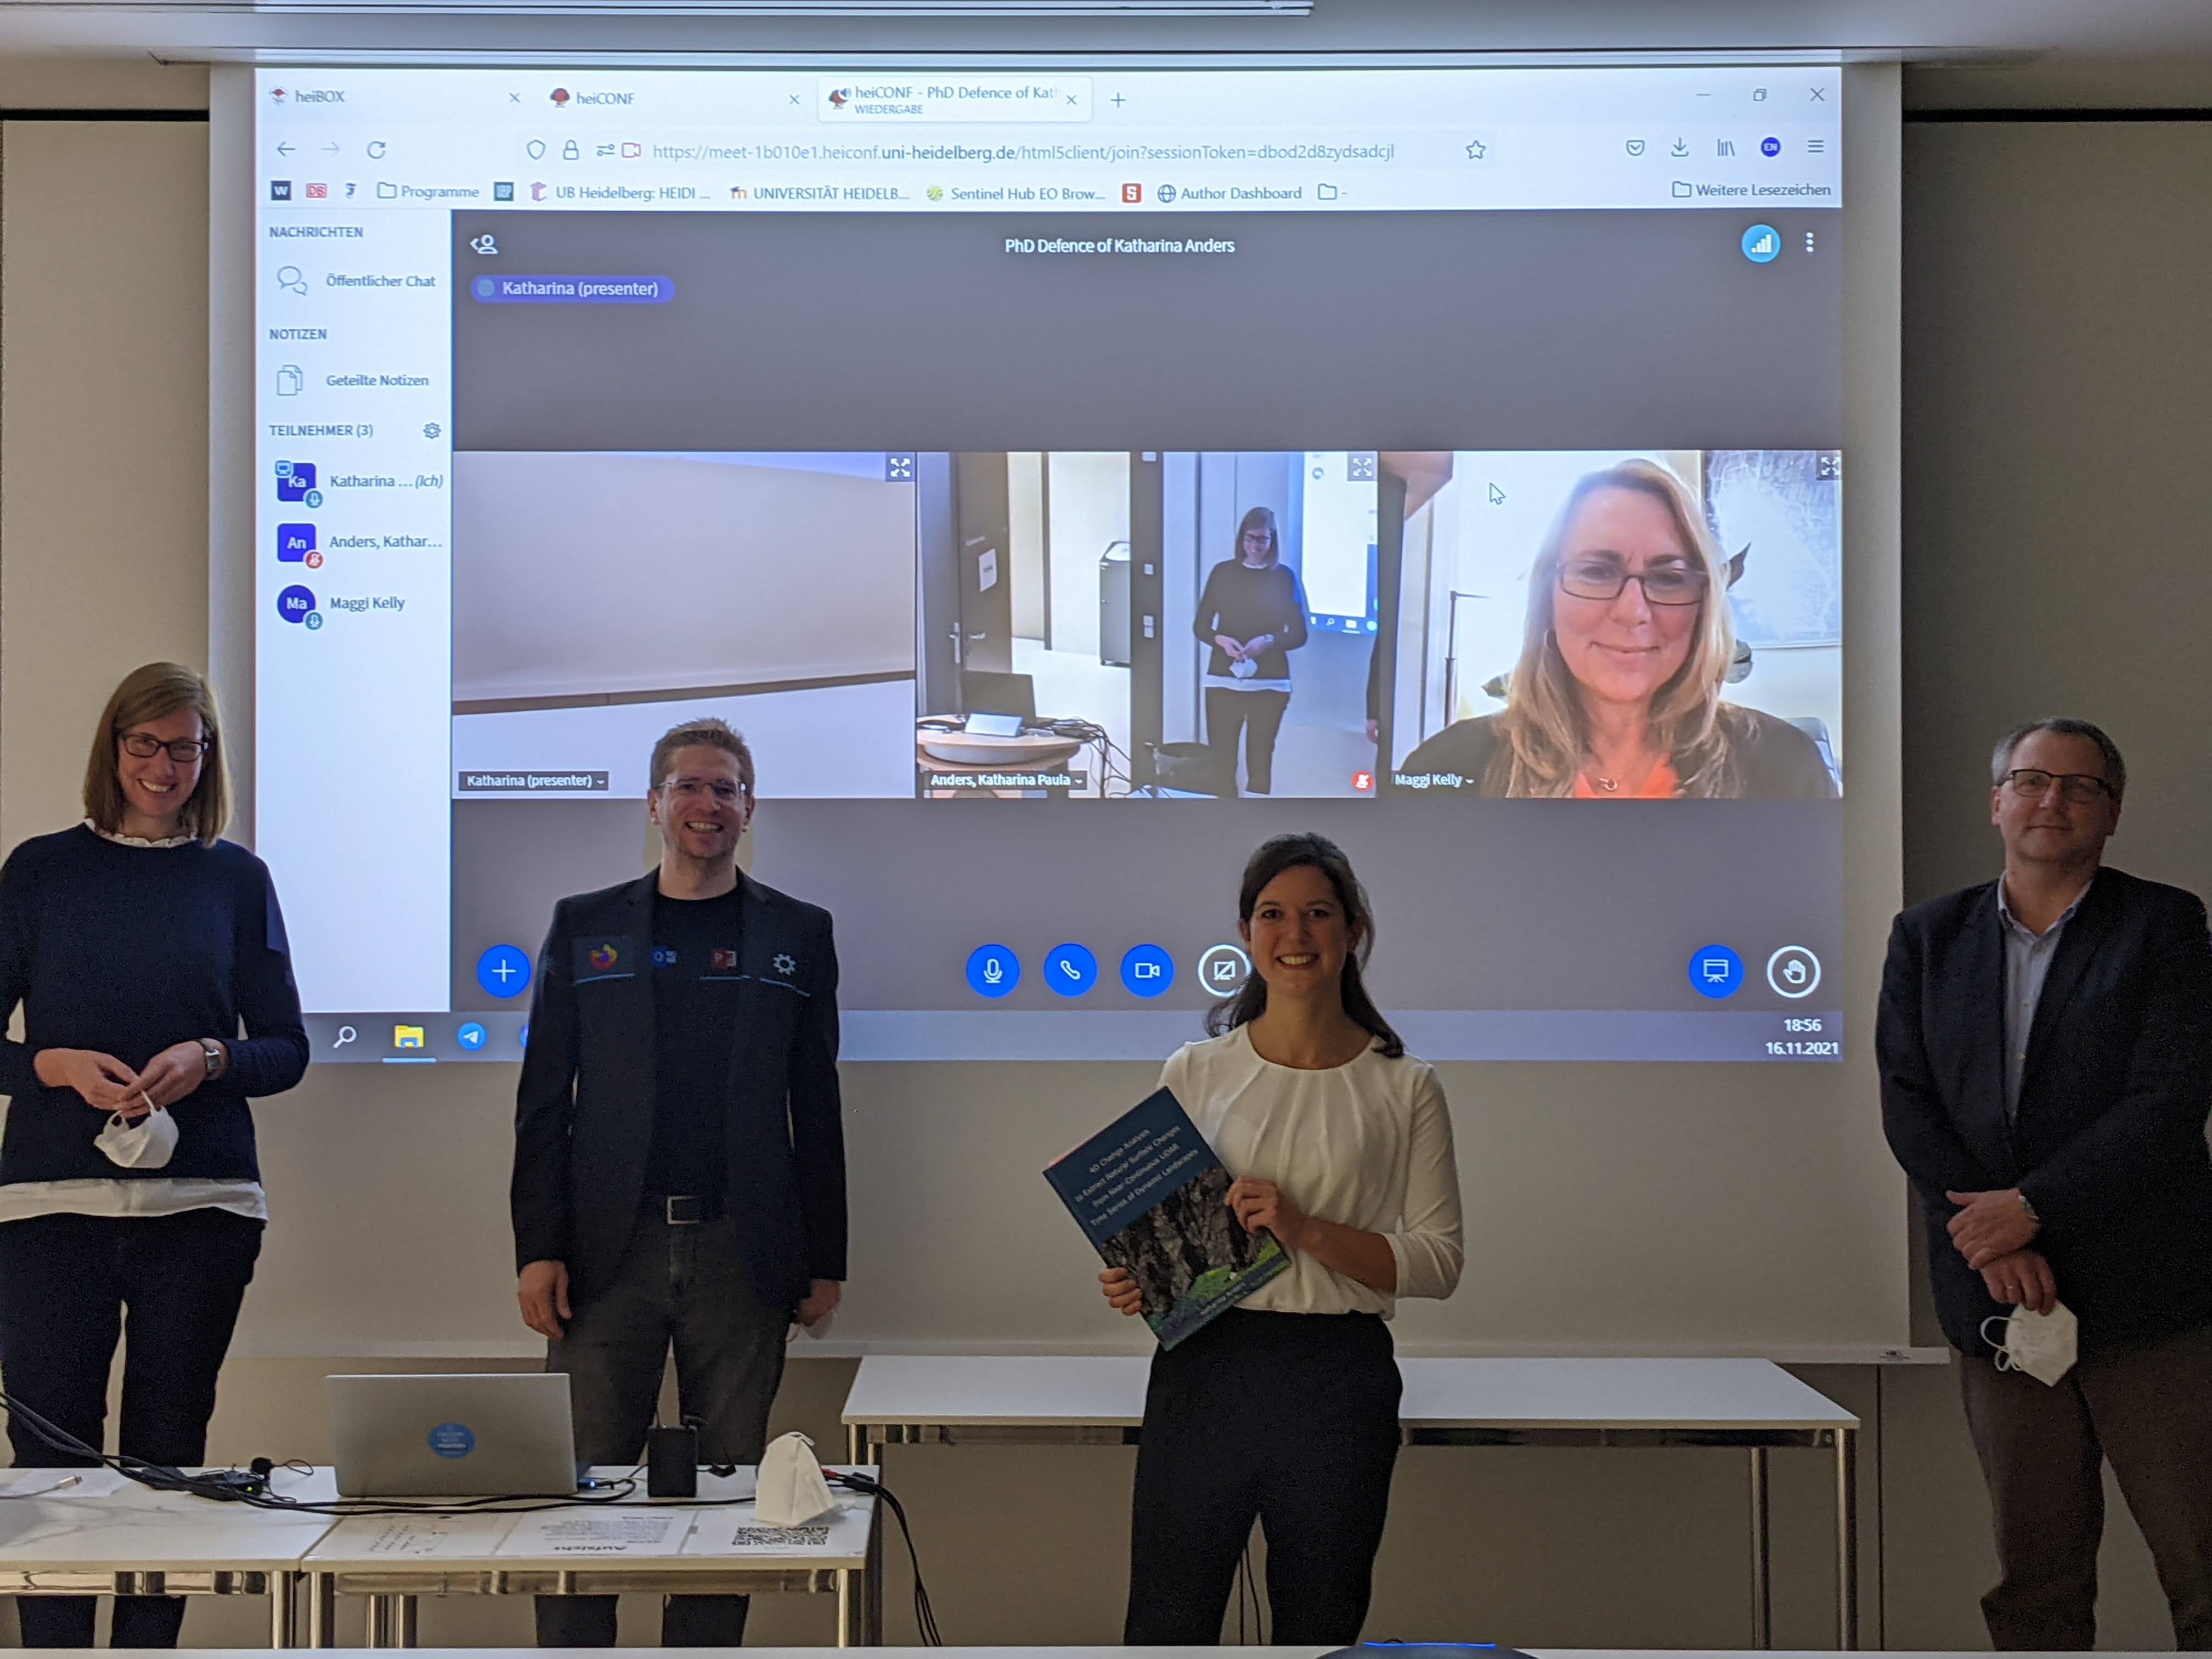 The defense took place in a hybrid format with Prof. Olaf Bubenzer, Jun.-Prof. Anna Growe, Prof. Bernhard Höfle and Prof. Maggi Kelly as members of the committee.